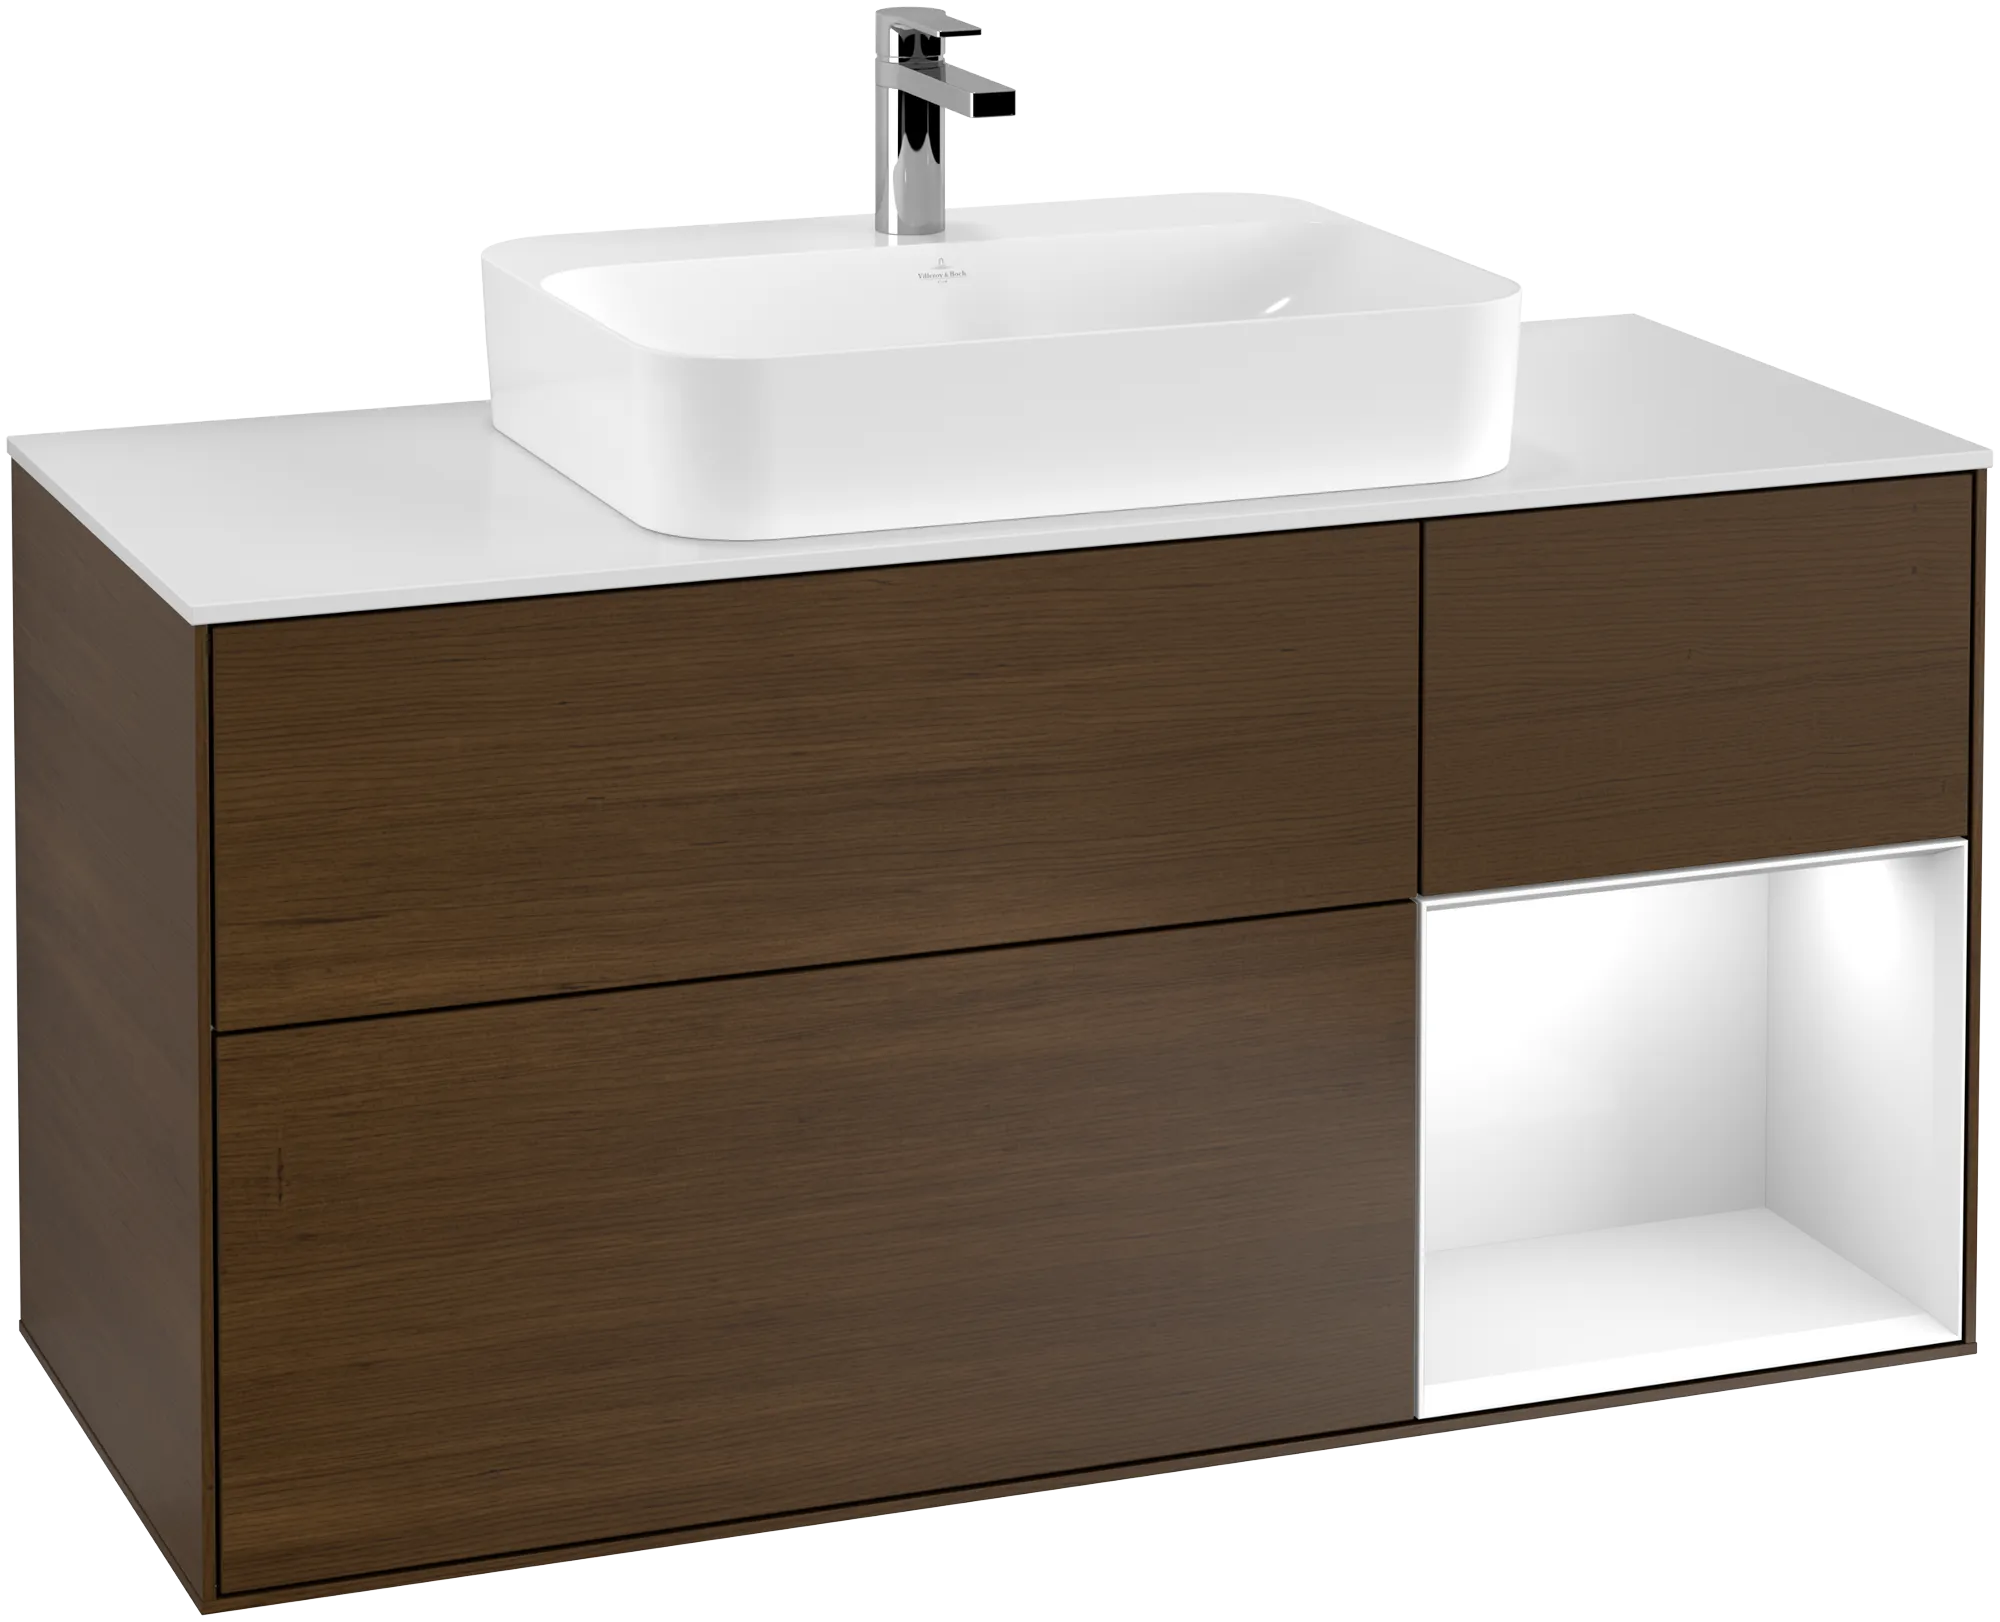 VILLEROY BOCH Finion Vanity unit, with lighting, 3 pull-out compartments, 1200 x 603 x 501 mm, Walnut Veneer / Glossy White Lacquer / Glass White Matt #G421GFGN resmi